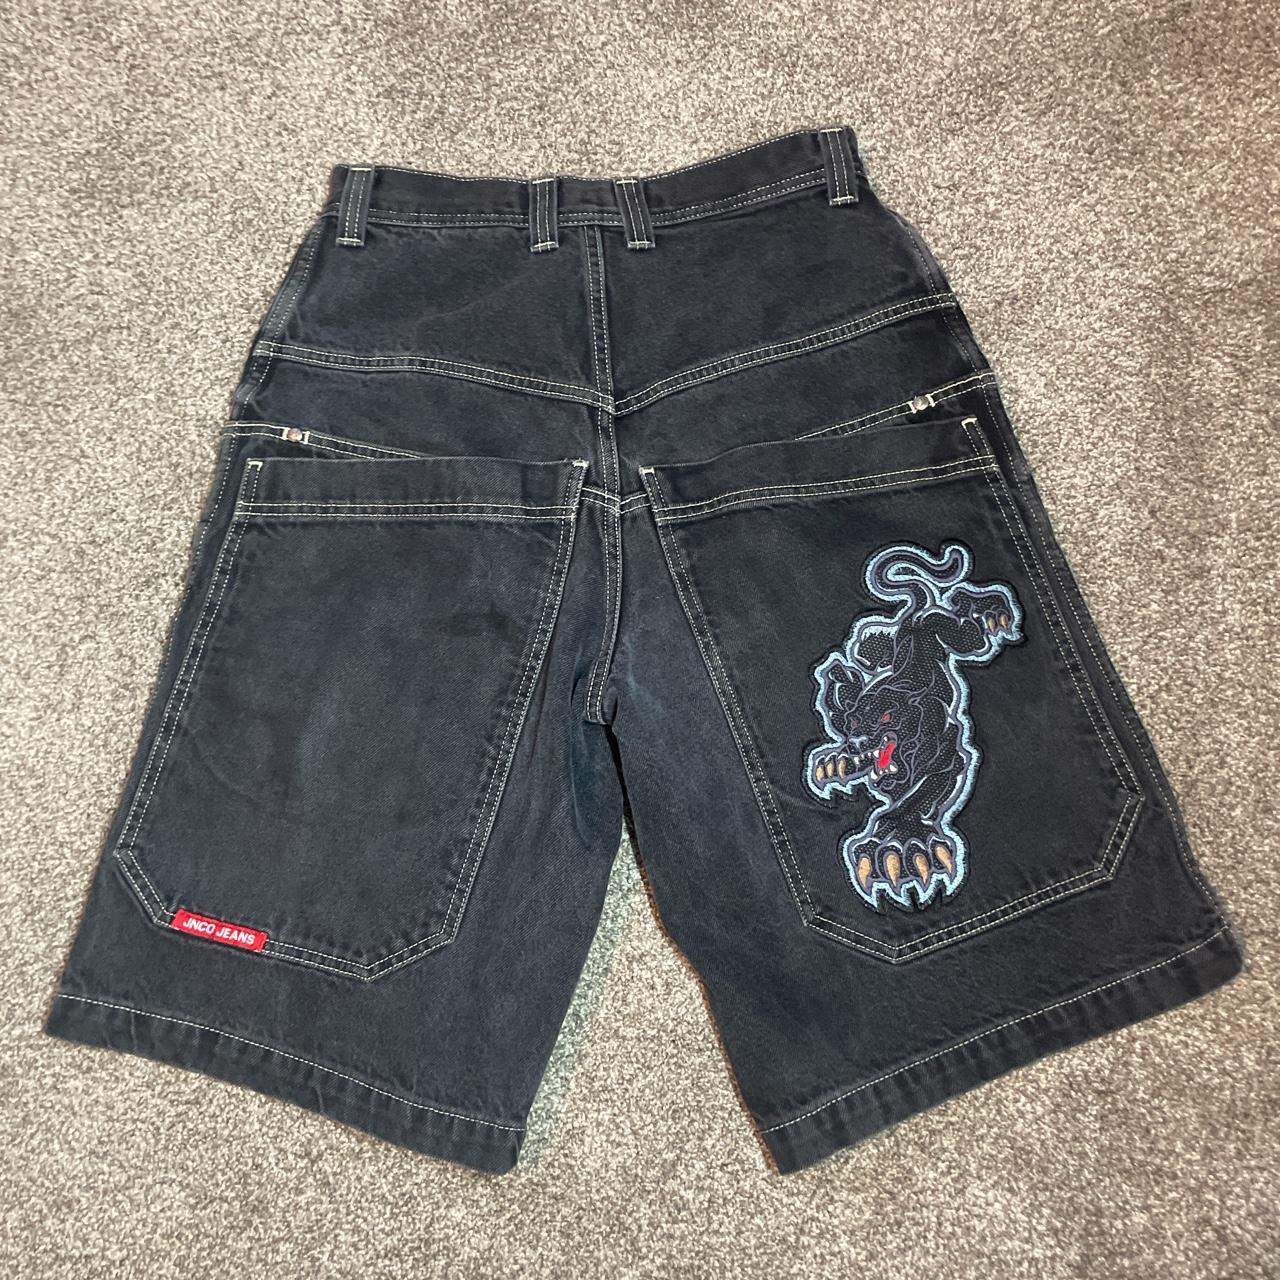 JNCO Panther Jorts🔥 Super Rare Size 30w Open to... - Depop